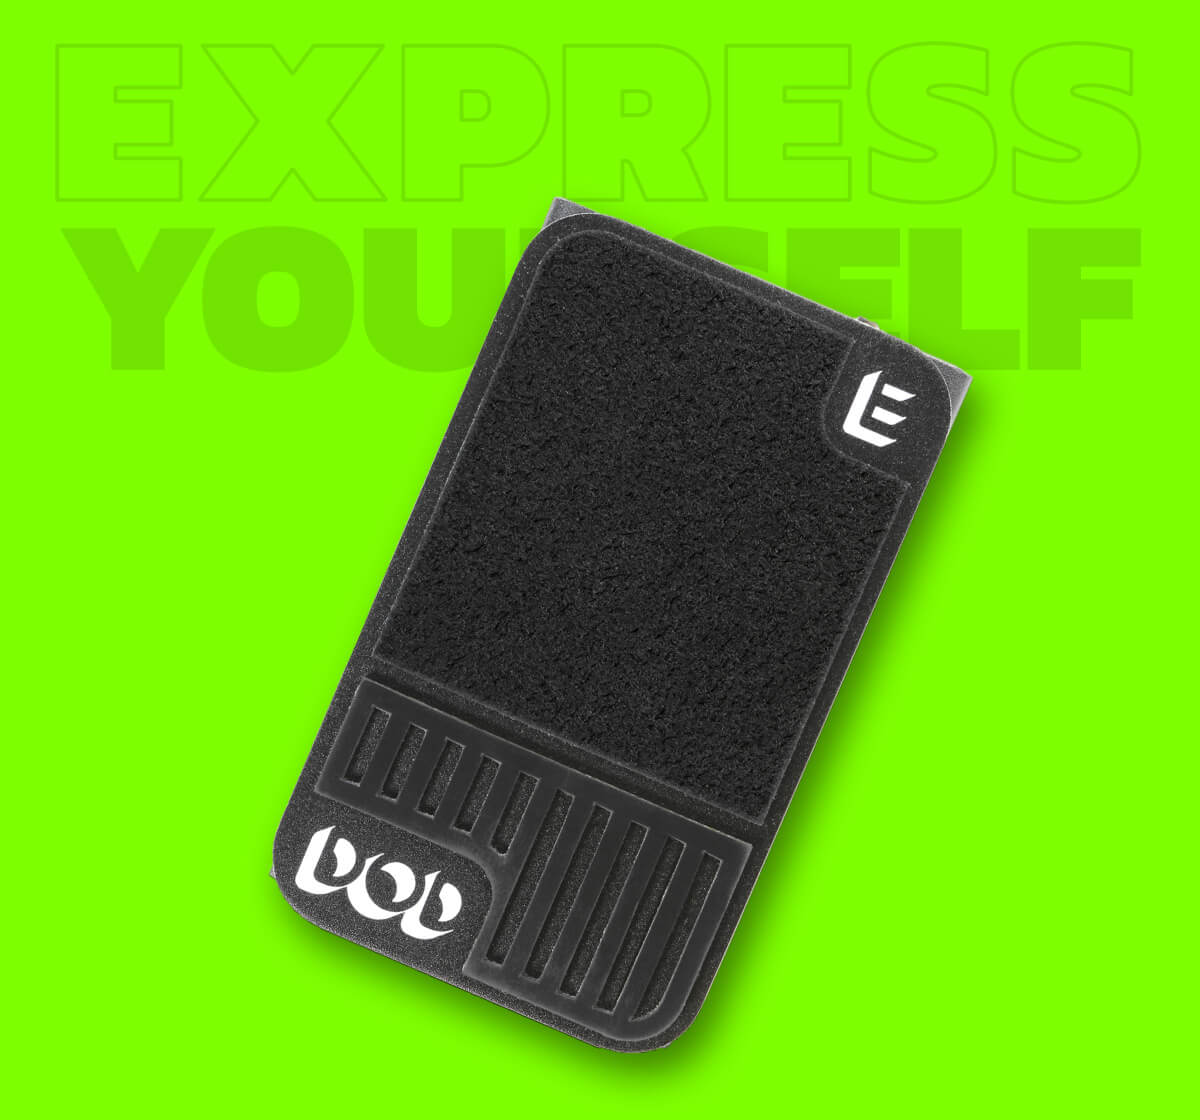 DOD Mini Expression ultra compact expression guitar pedal in black with green background and graphics that says 